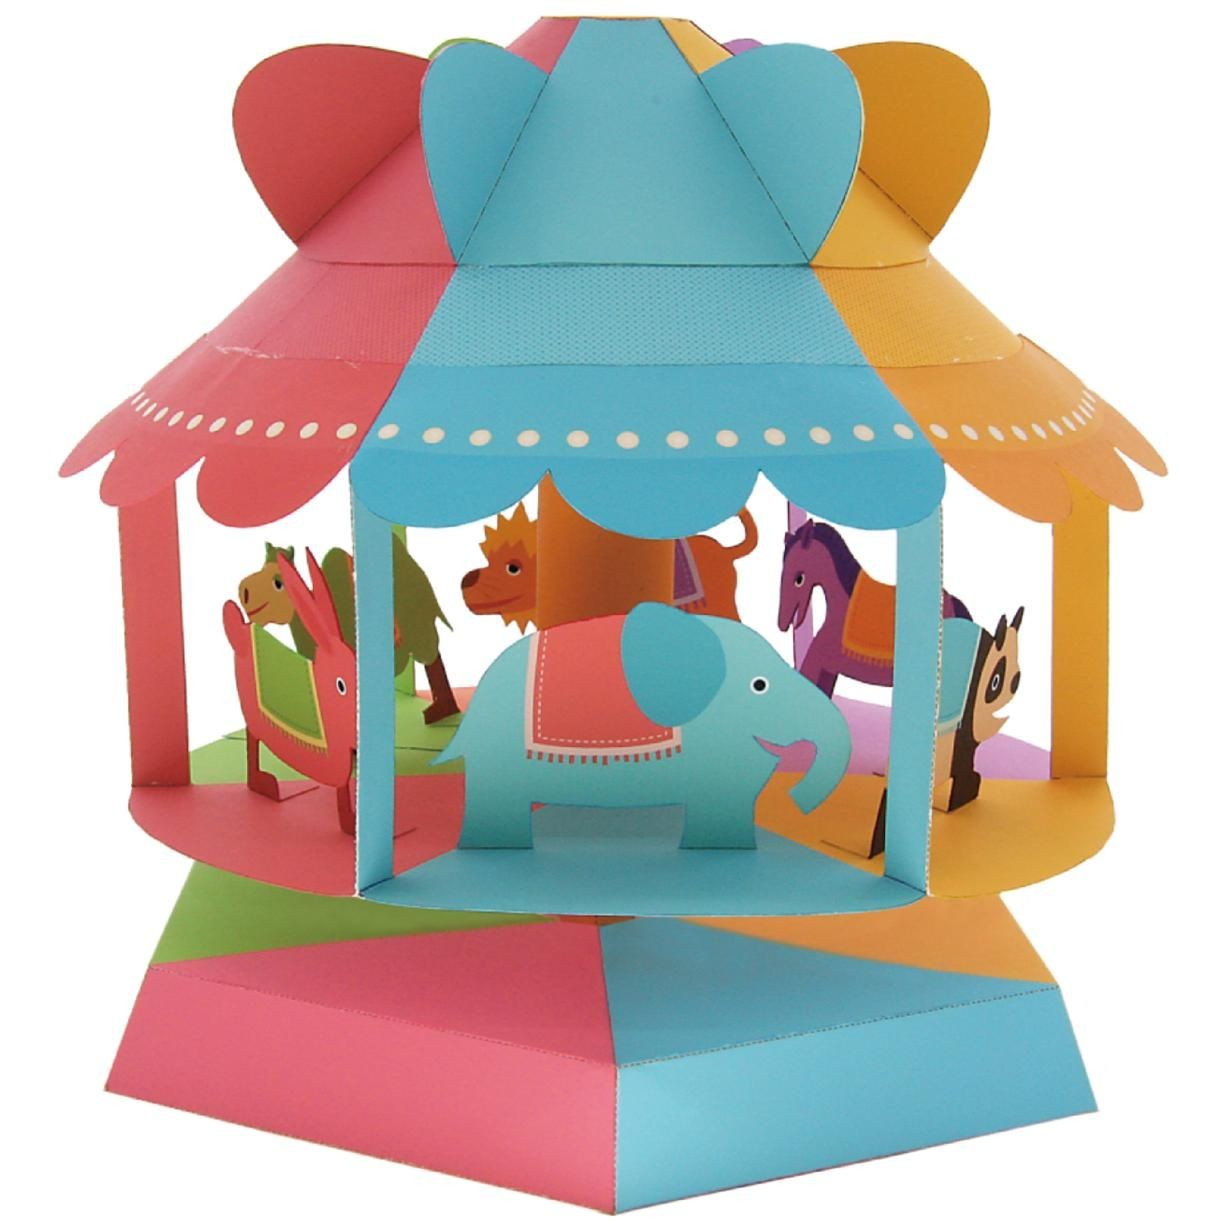 Moving Papercraft Wind Powered Merry Go Round toys Paper Craft Educational Rabbit